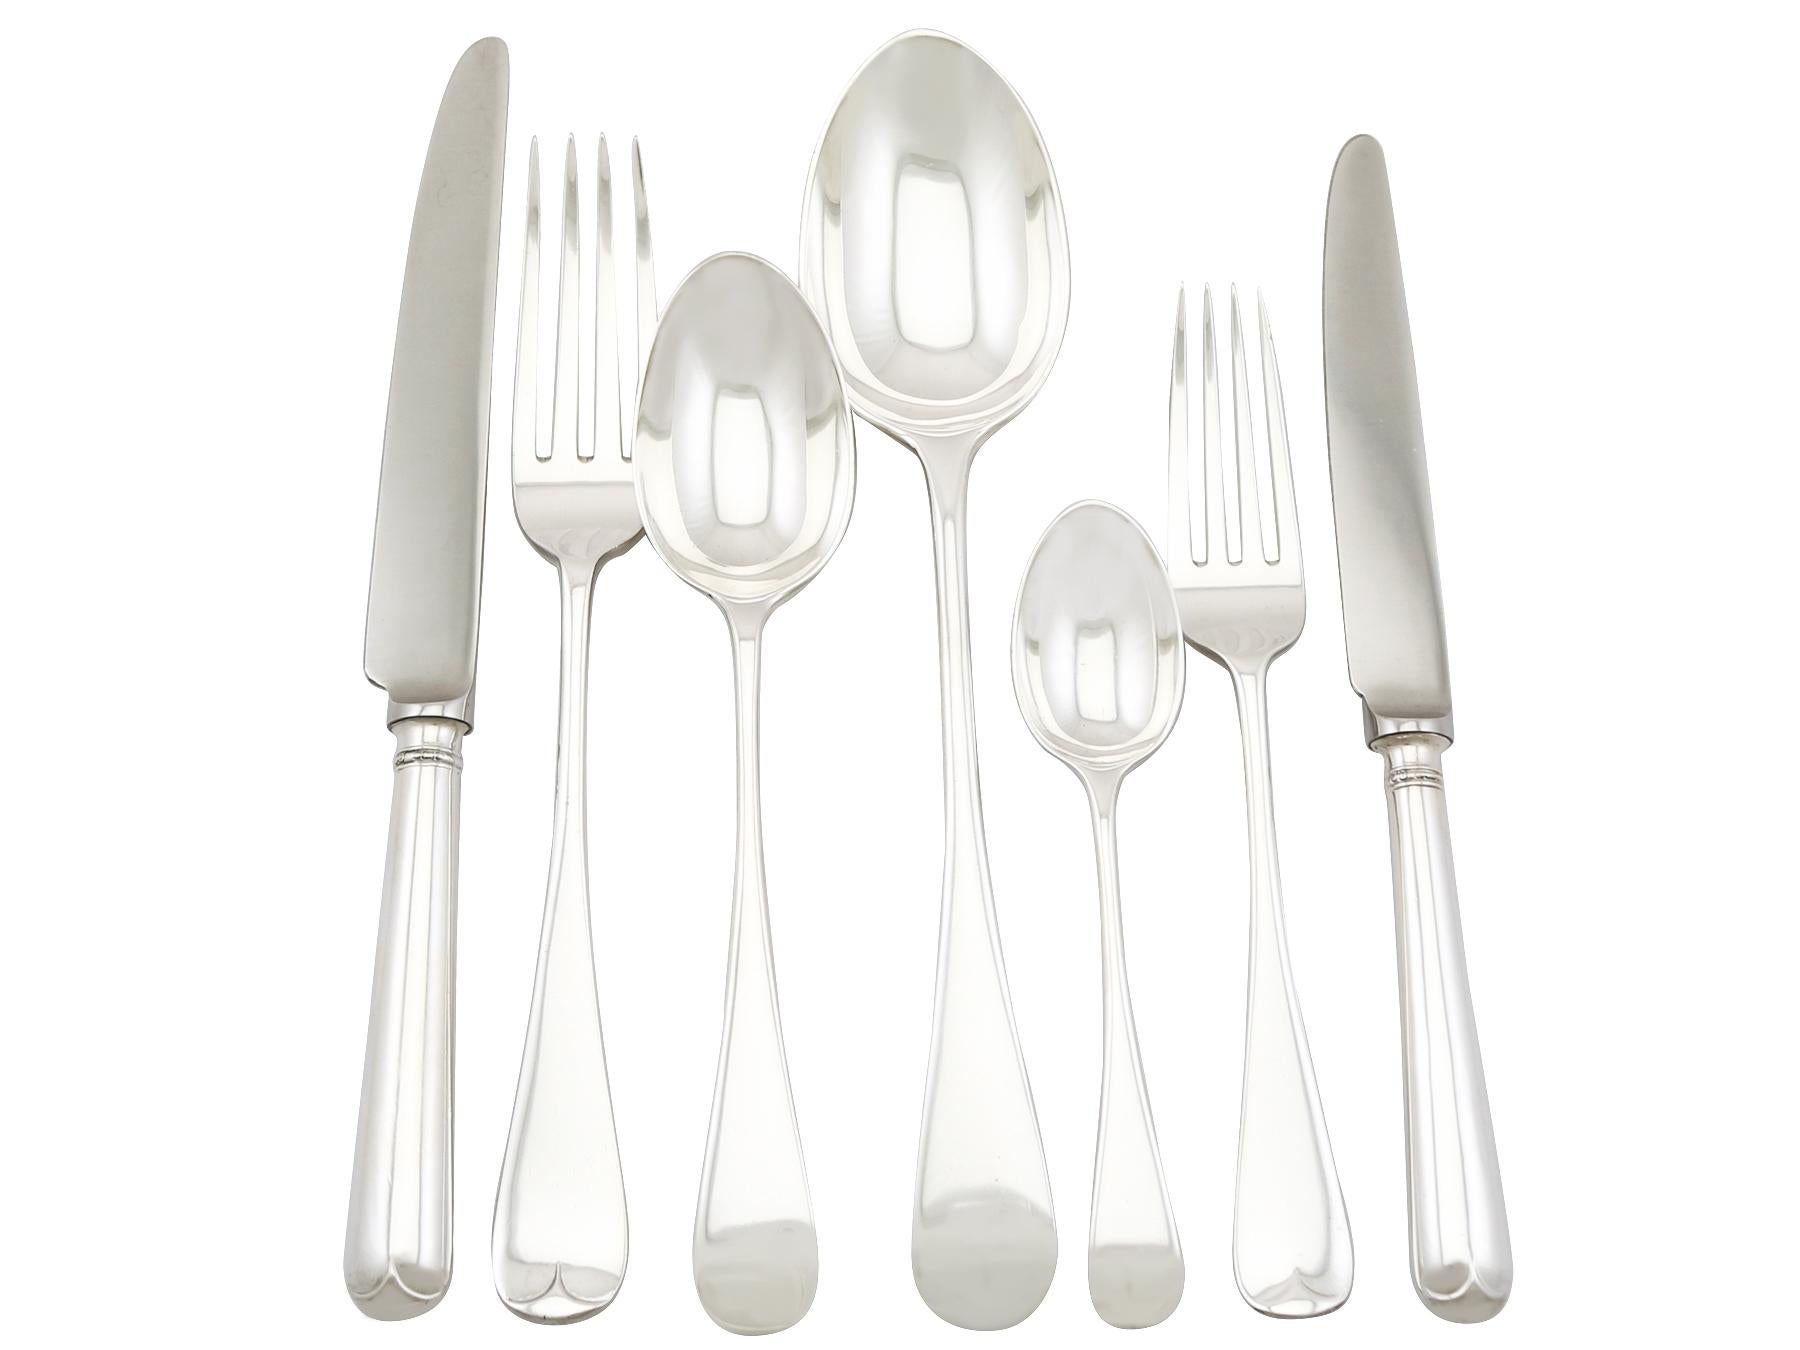 An exceptional, fine and impressive, comprehensive antique English sterling silver old English pattern canteen of cutlery for eight persons; an addition to our antique flatware sets.

The pieces of this exceptional and comprehensive, straight